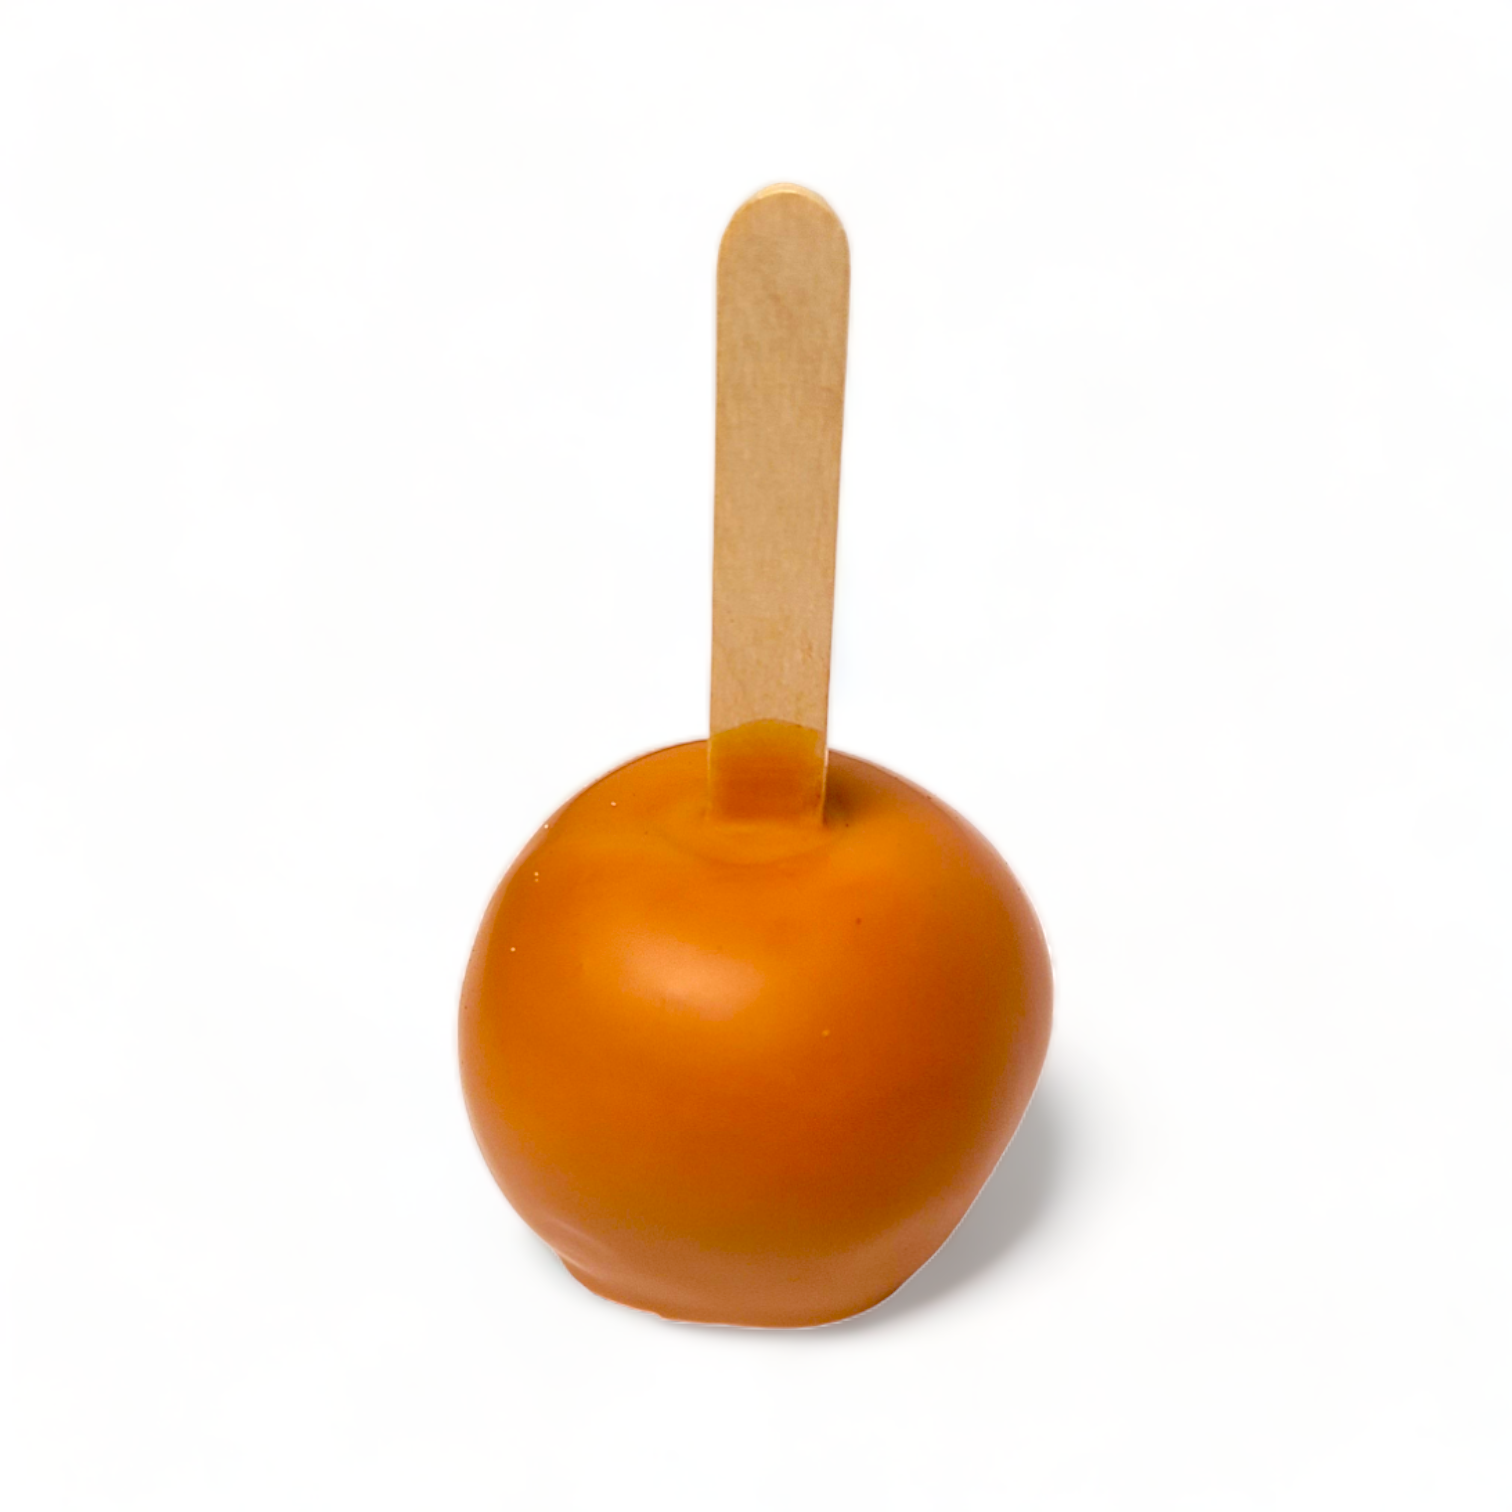 Candied Caramel Apple - 2oz Pack